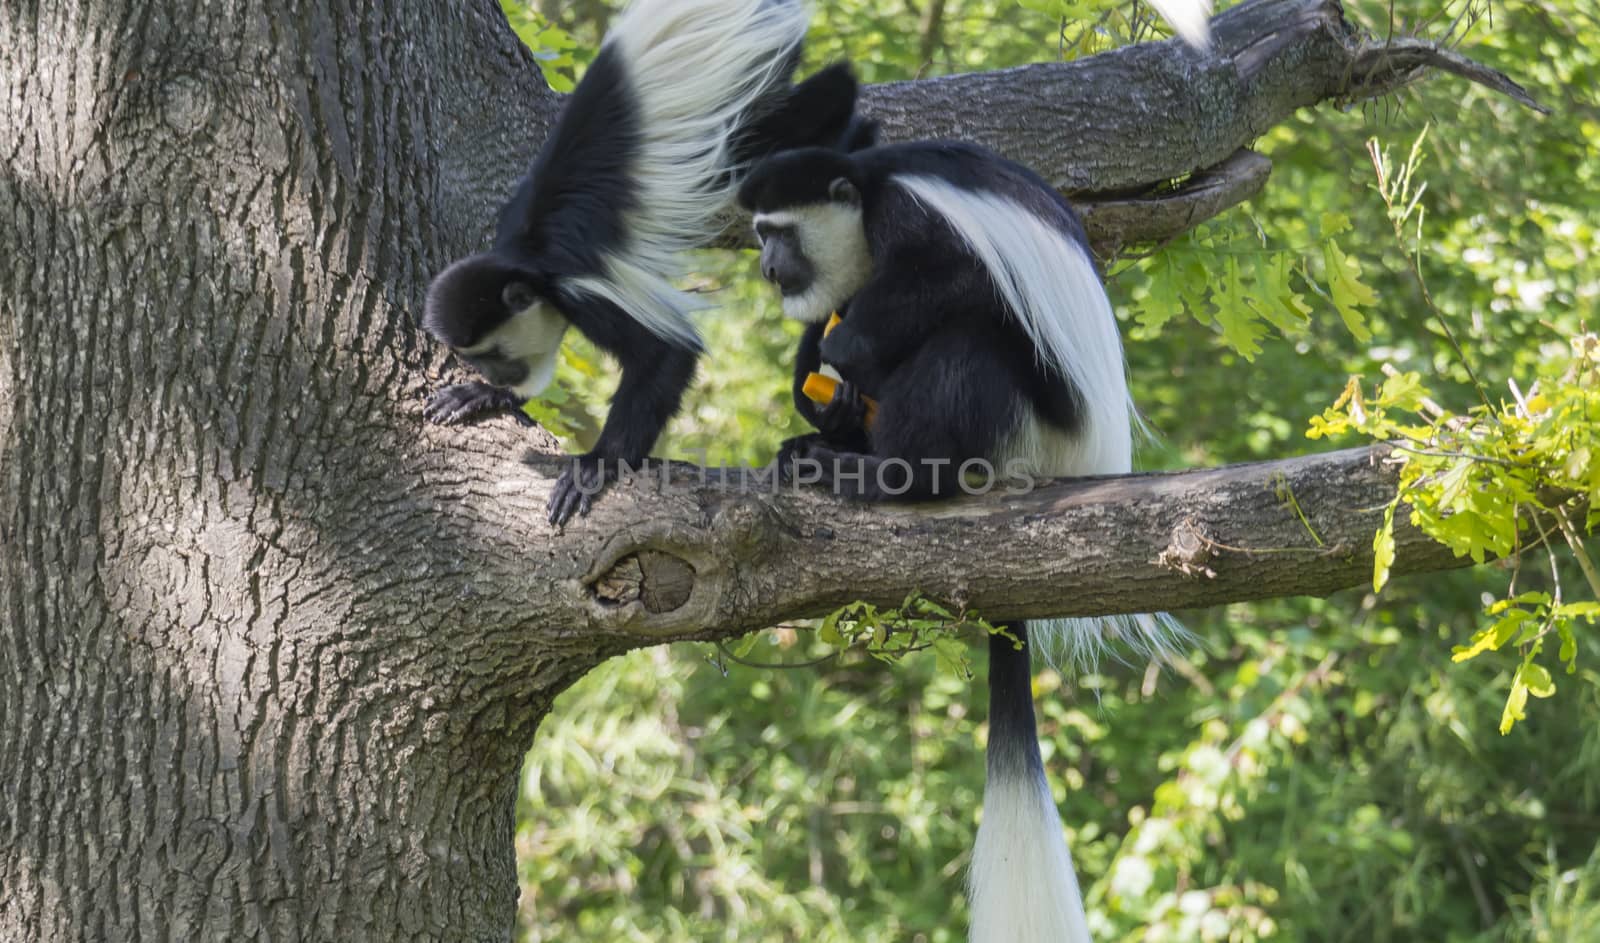 couple of young Mantled guereza monkey also named Colobus guereza eating fruits sitting on tree branch, natural sunlight, copy space.